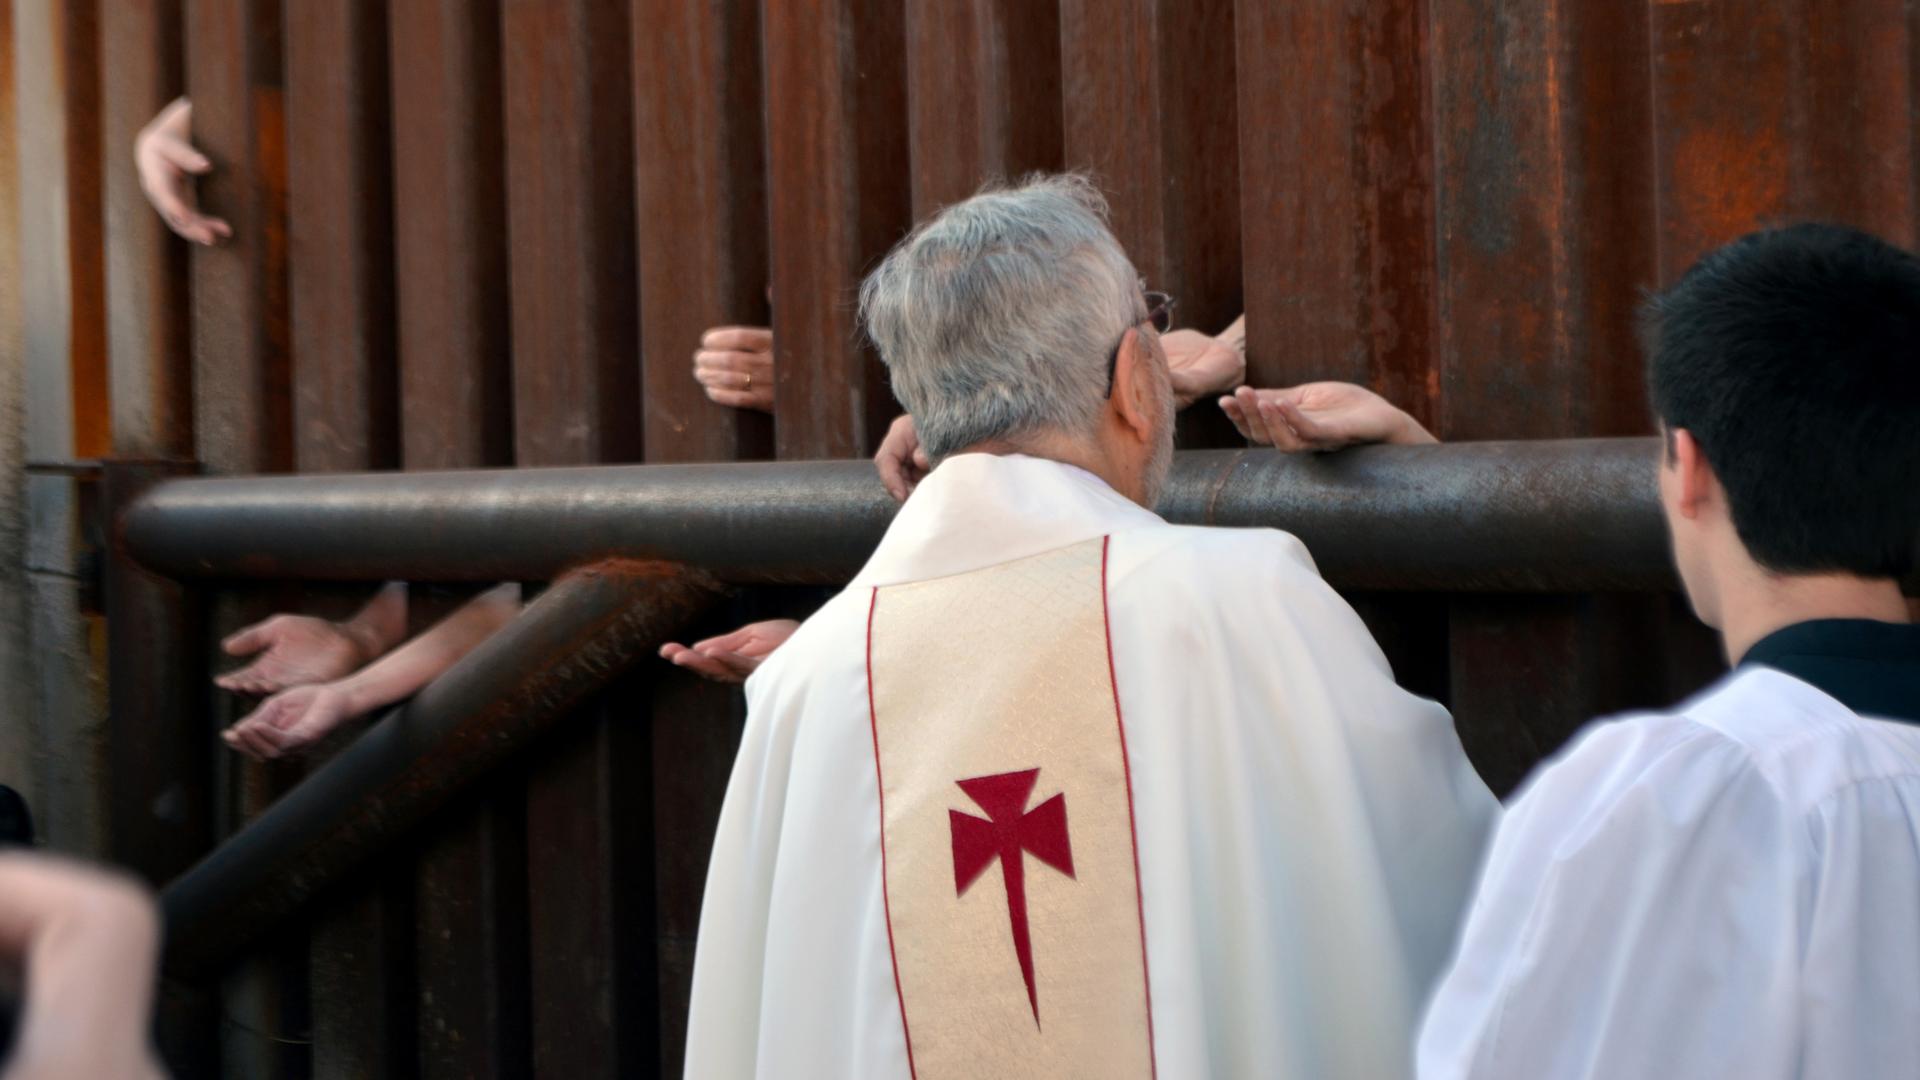 People on the Mexican side of the border reach through fence in Nogales, Arizona, to receive Holy Communion from the Bishop of Tucson, Gerald Kicanas.